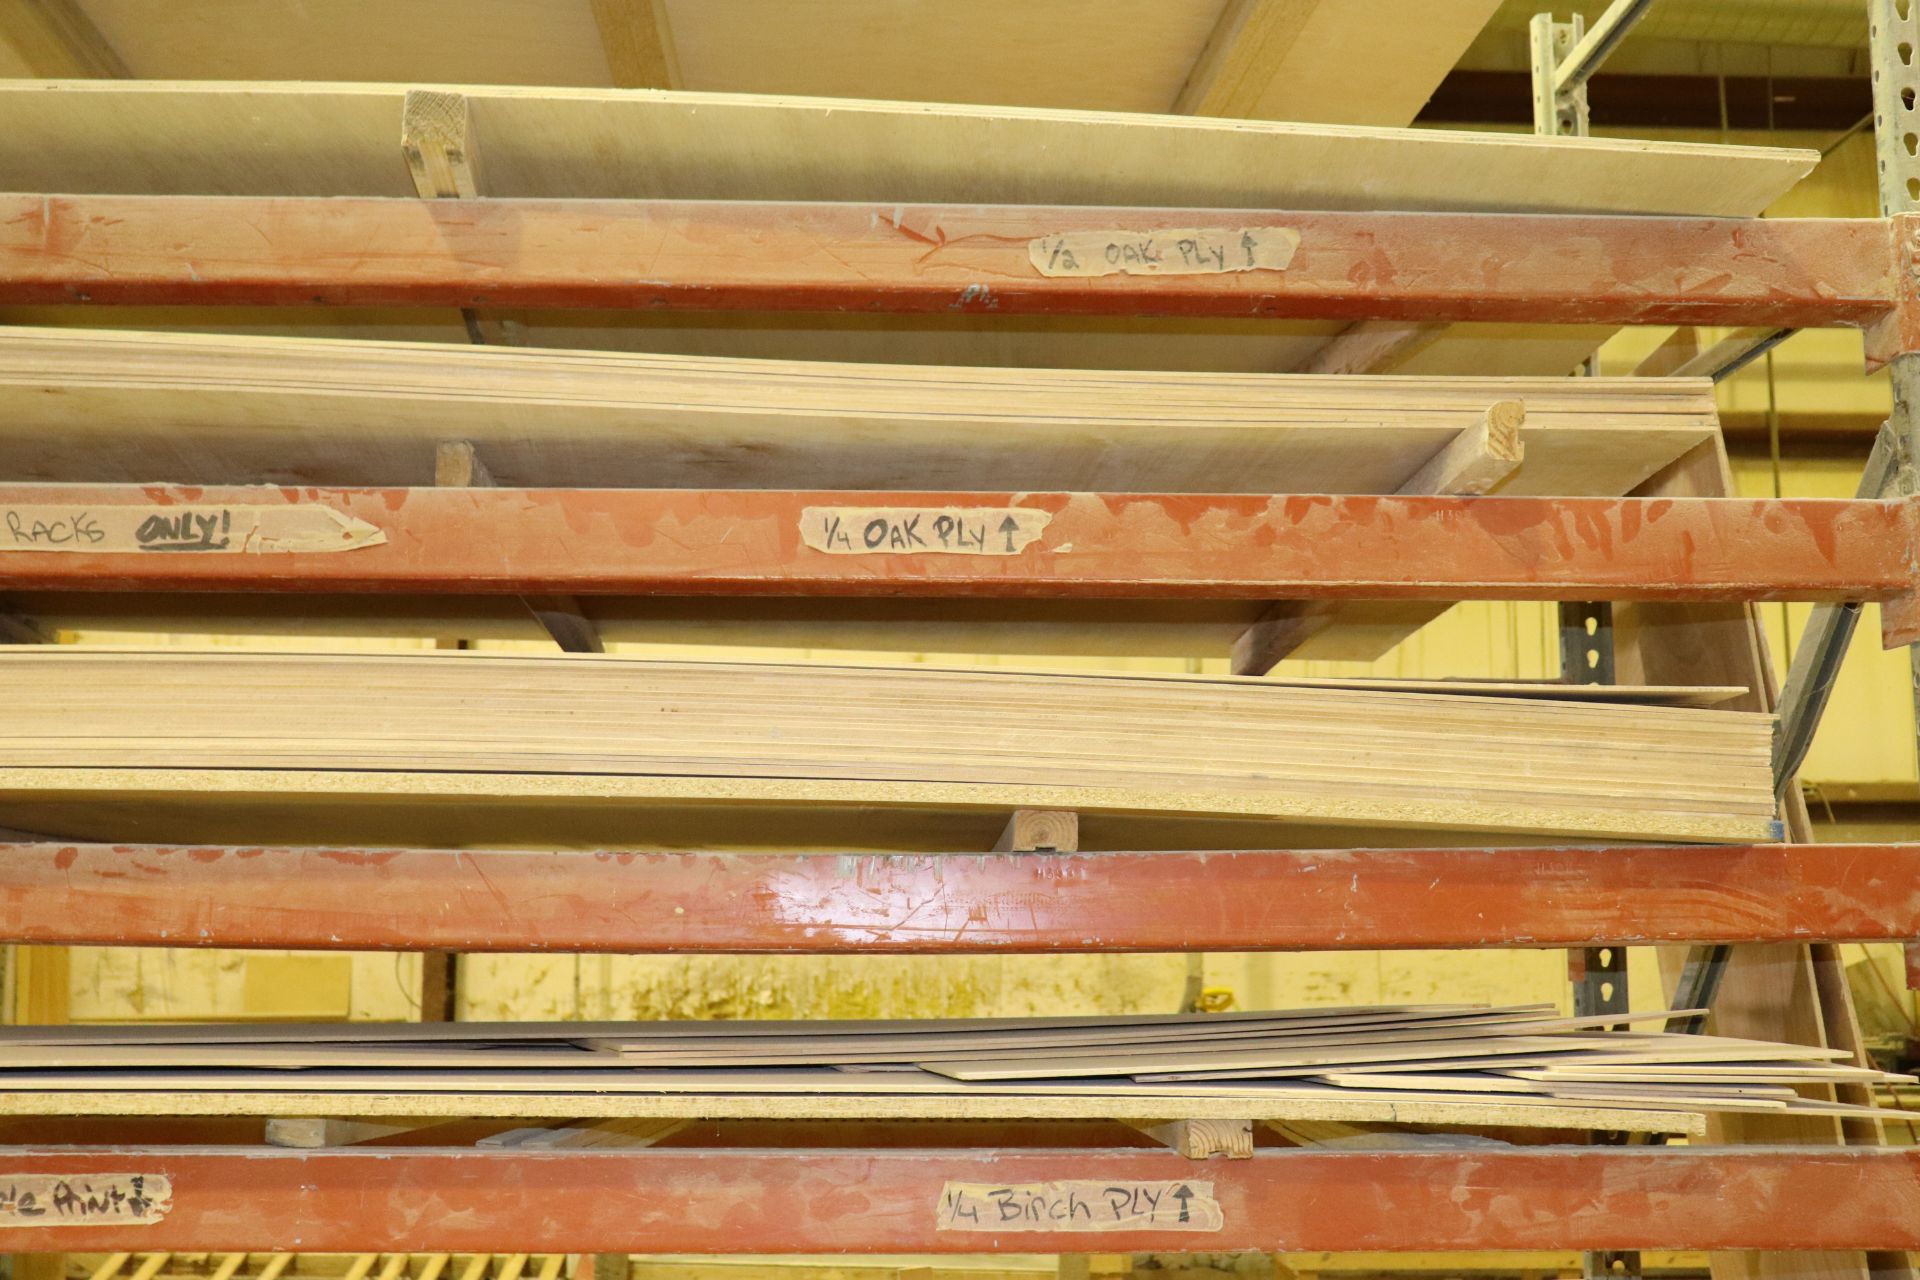 Contents of five pallet racks, 4 x 8, laminated wood stock - Image 8 of 11